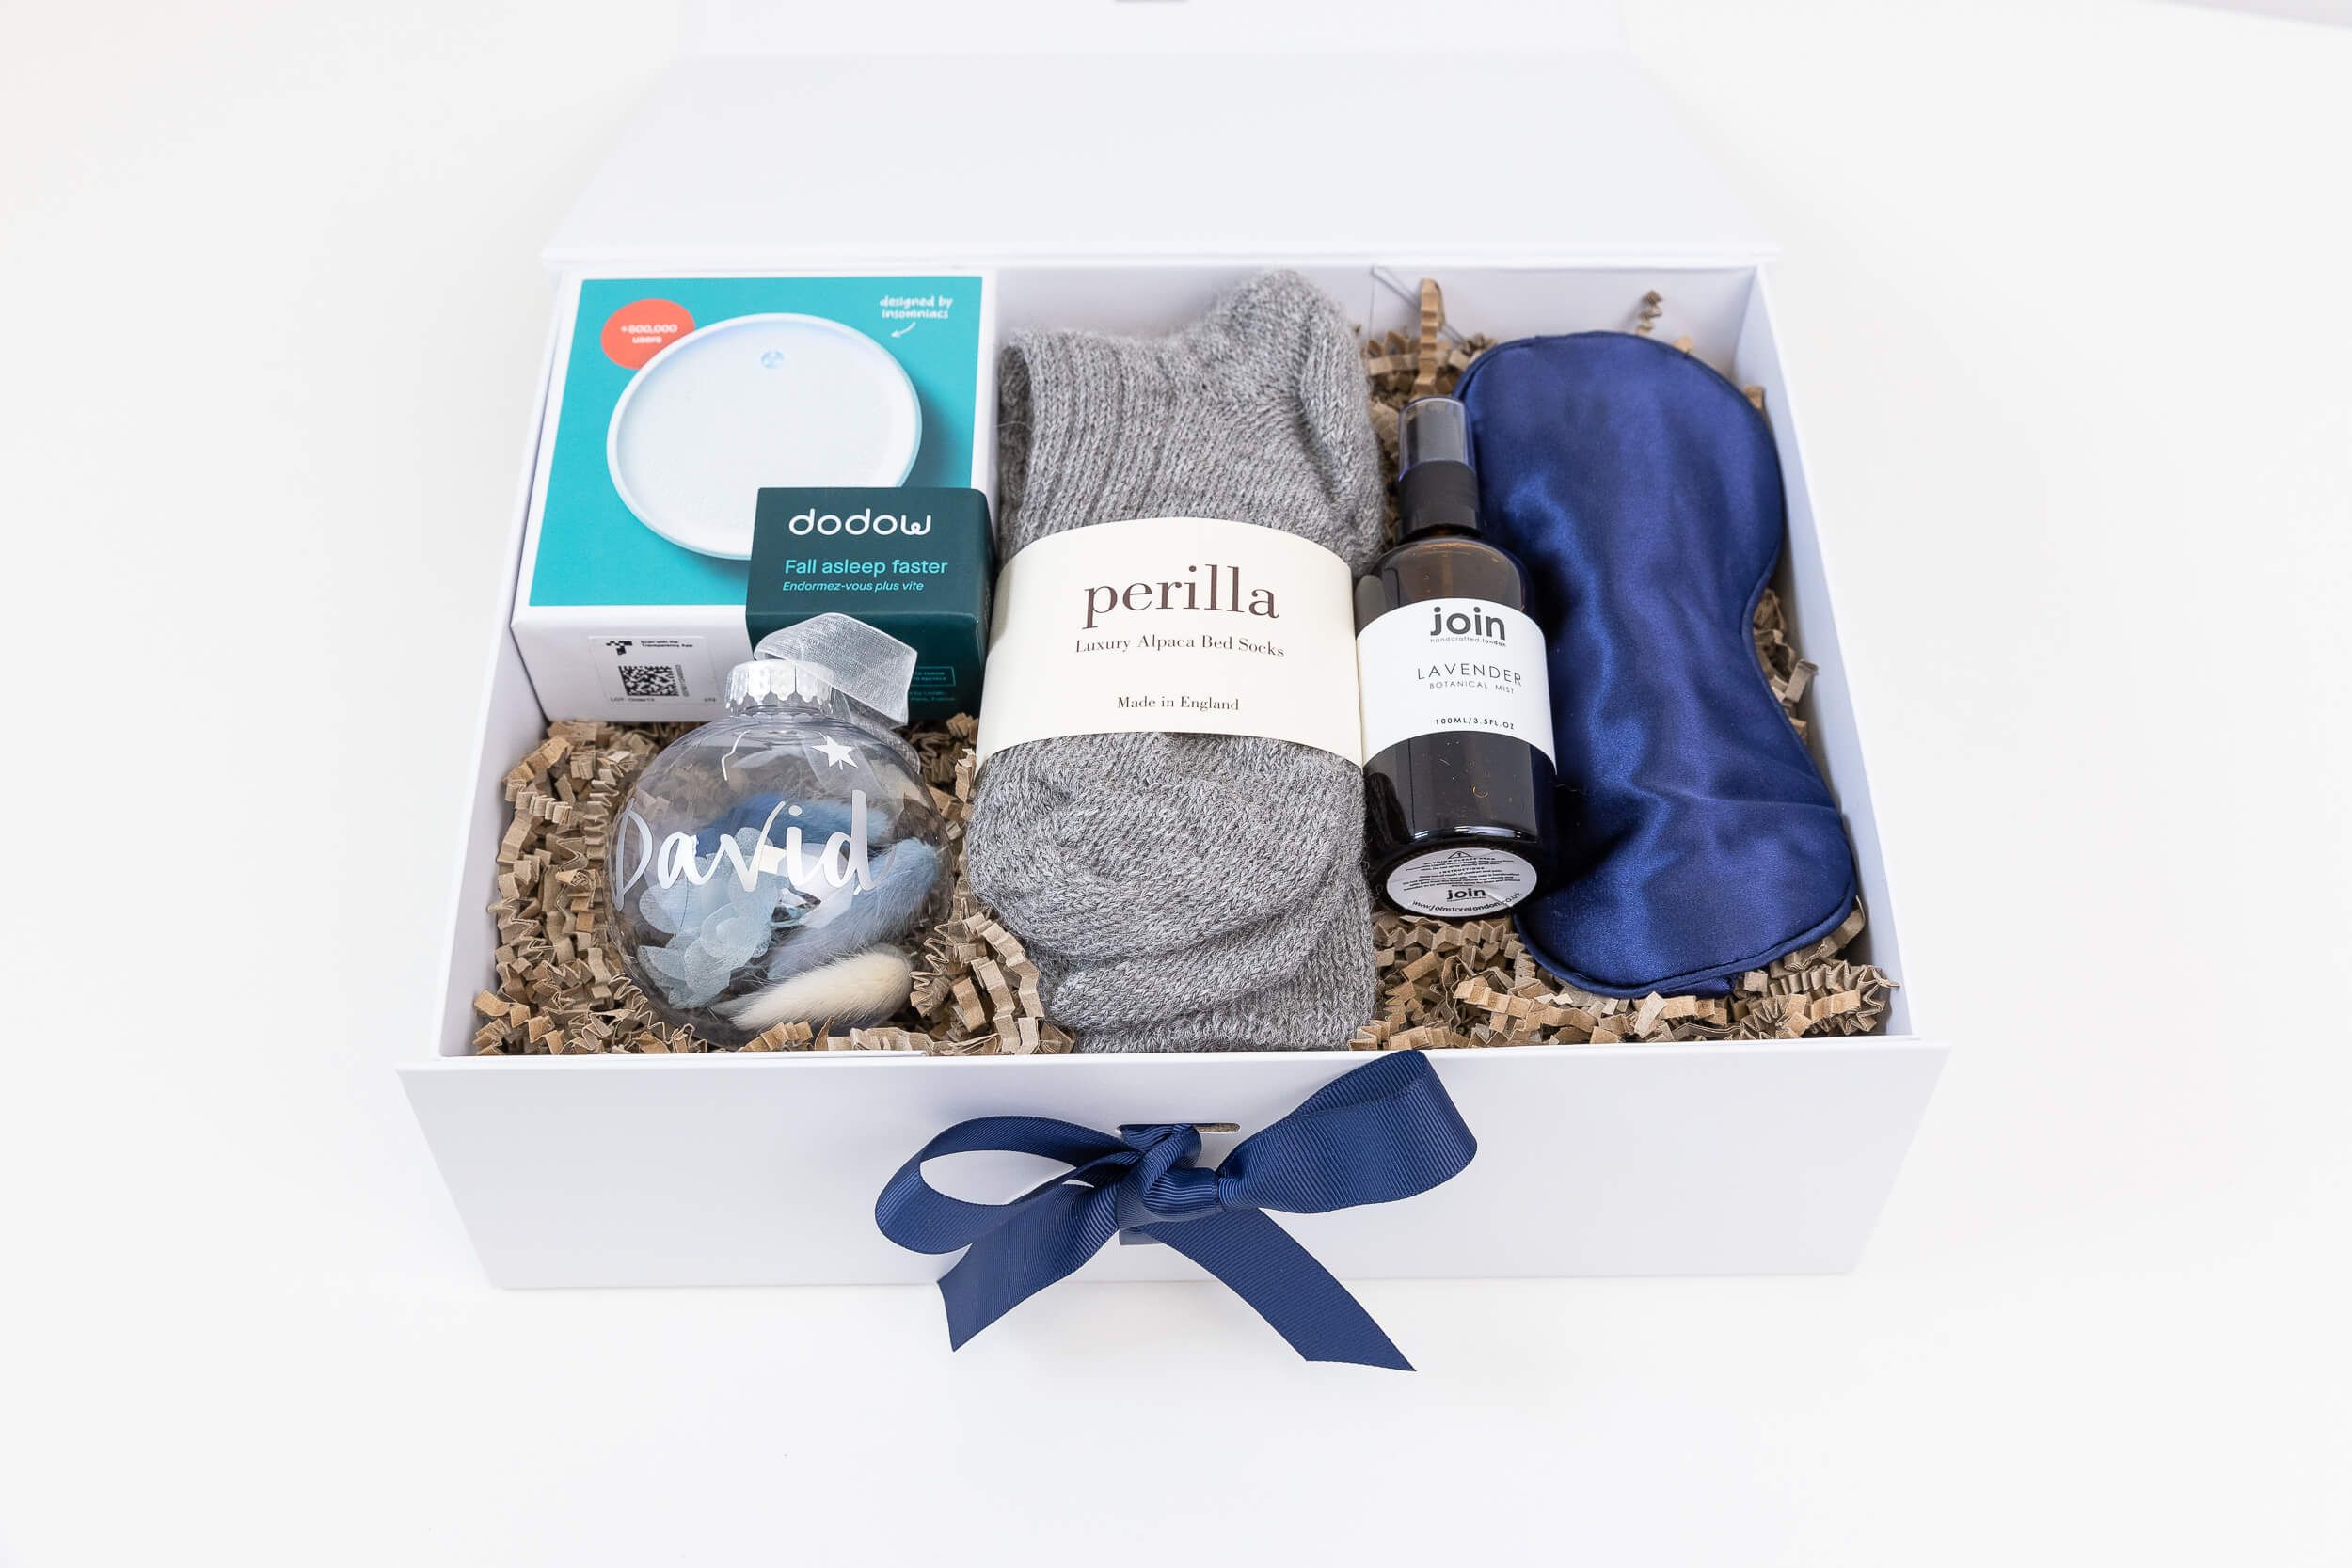 Sweet Dreams Christmas Employee Gifts with Perilla alpaca bed socks, British-made silk eye mask and Join lavender mist